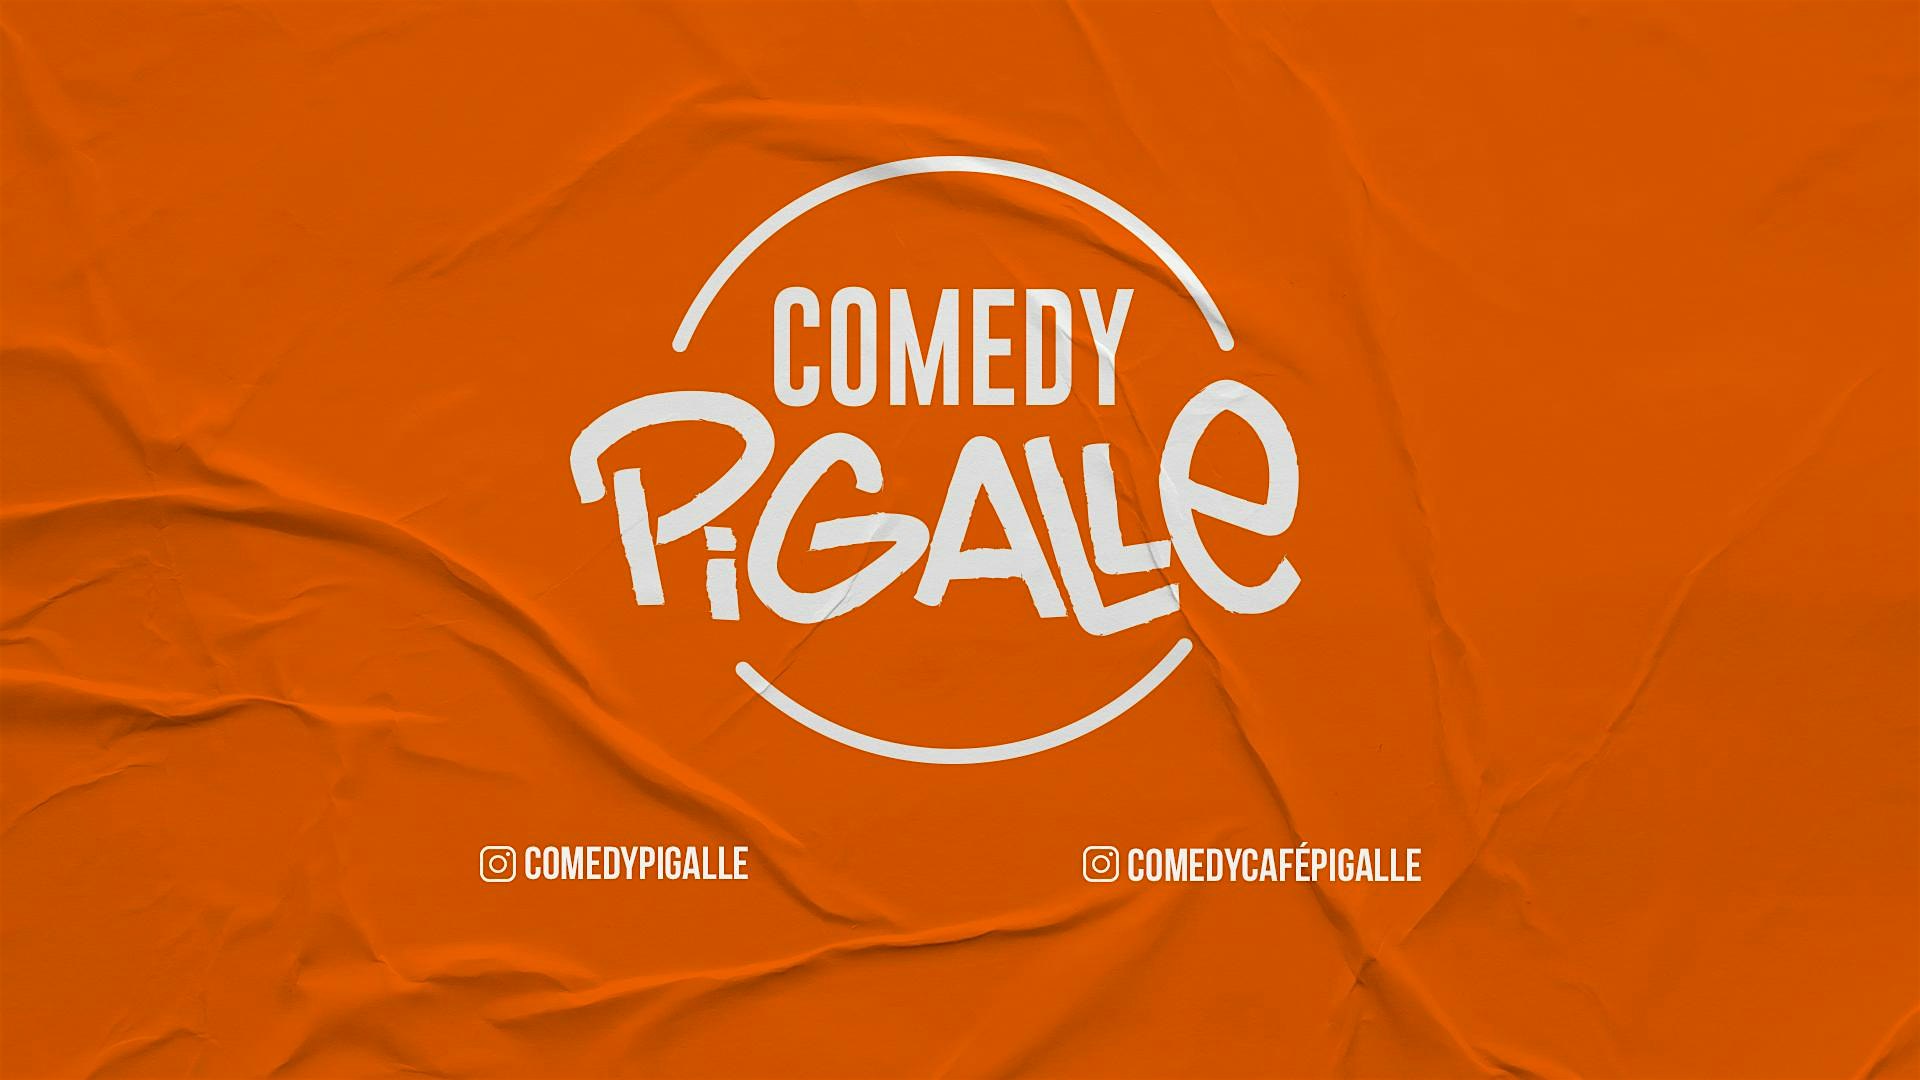 Comedy Pigalle